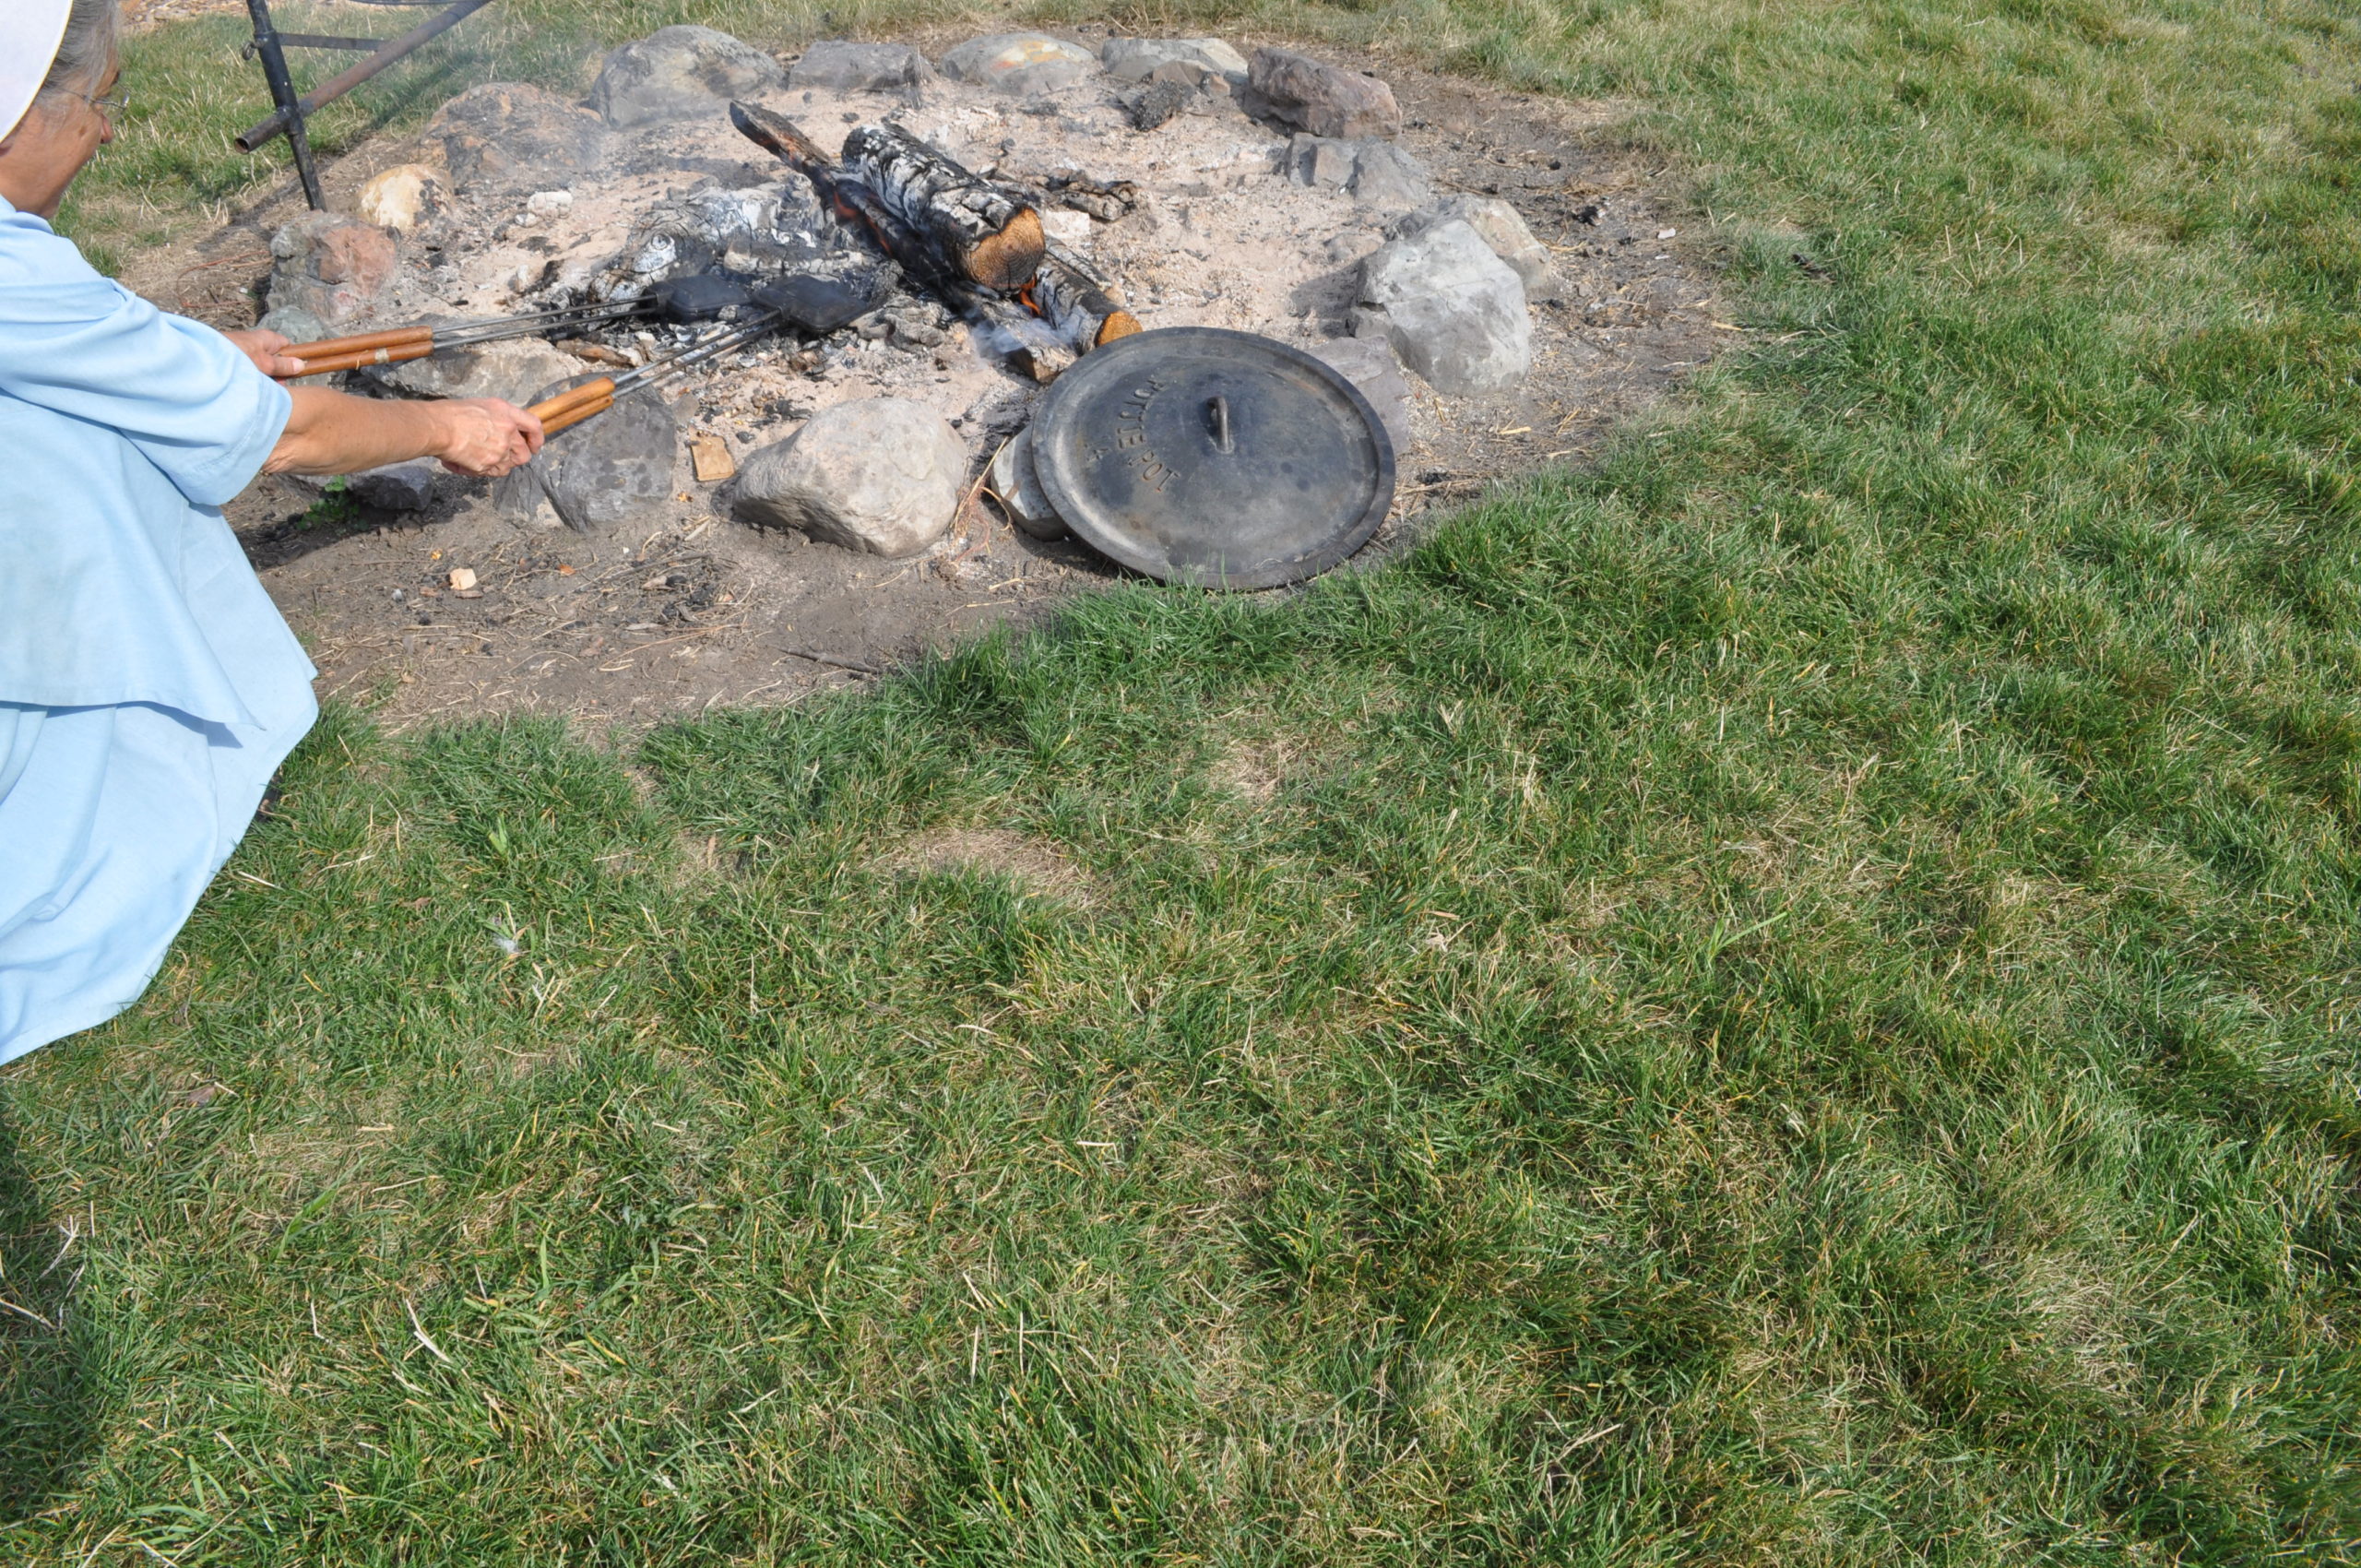 Cooking over a campfire is enjoyed by the Amish.